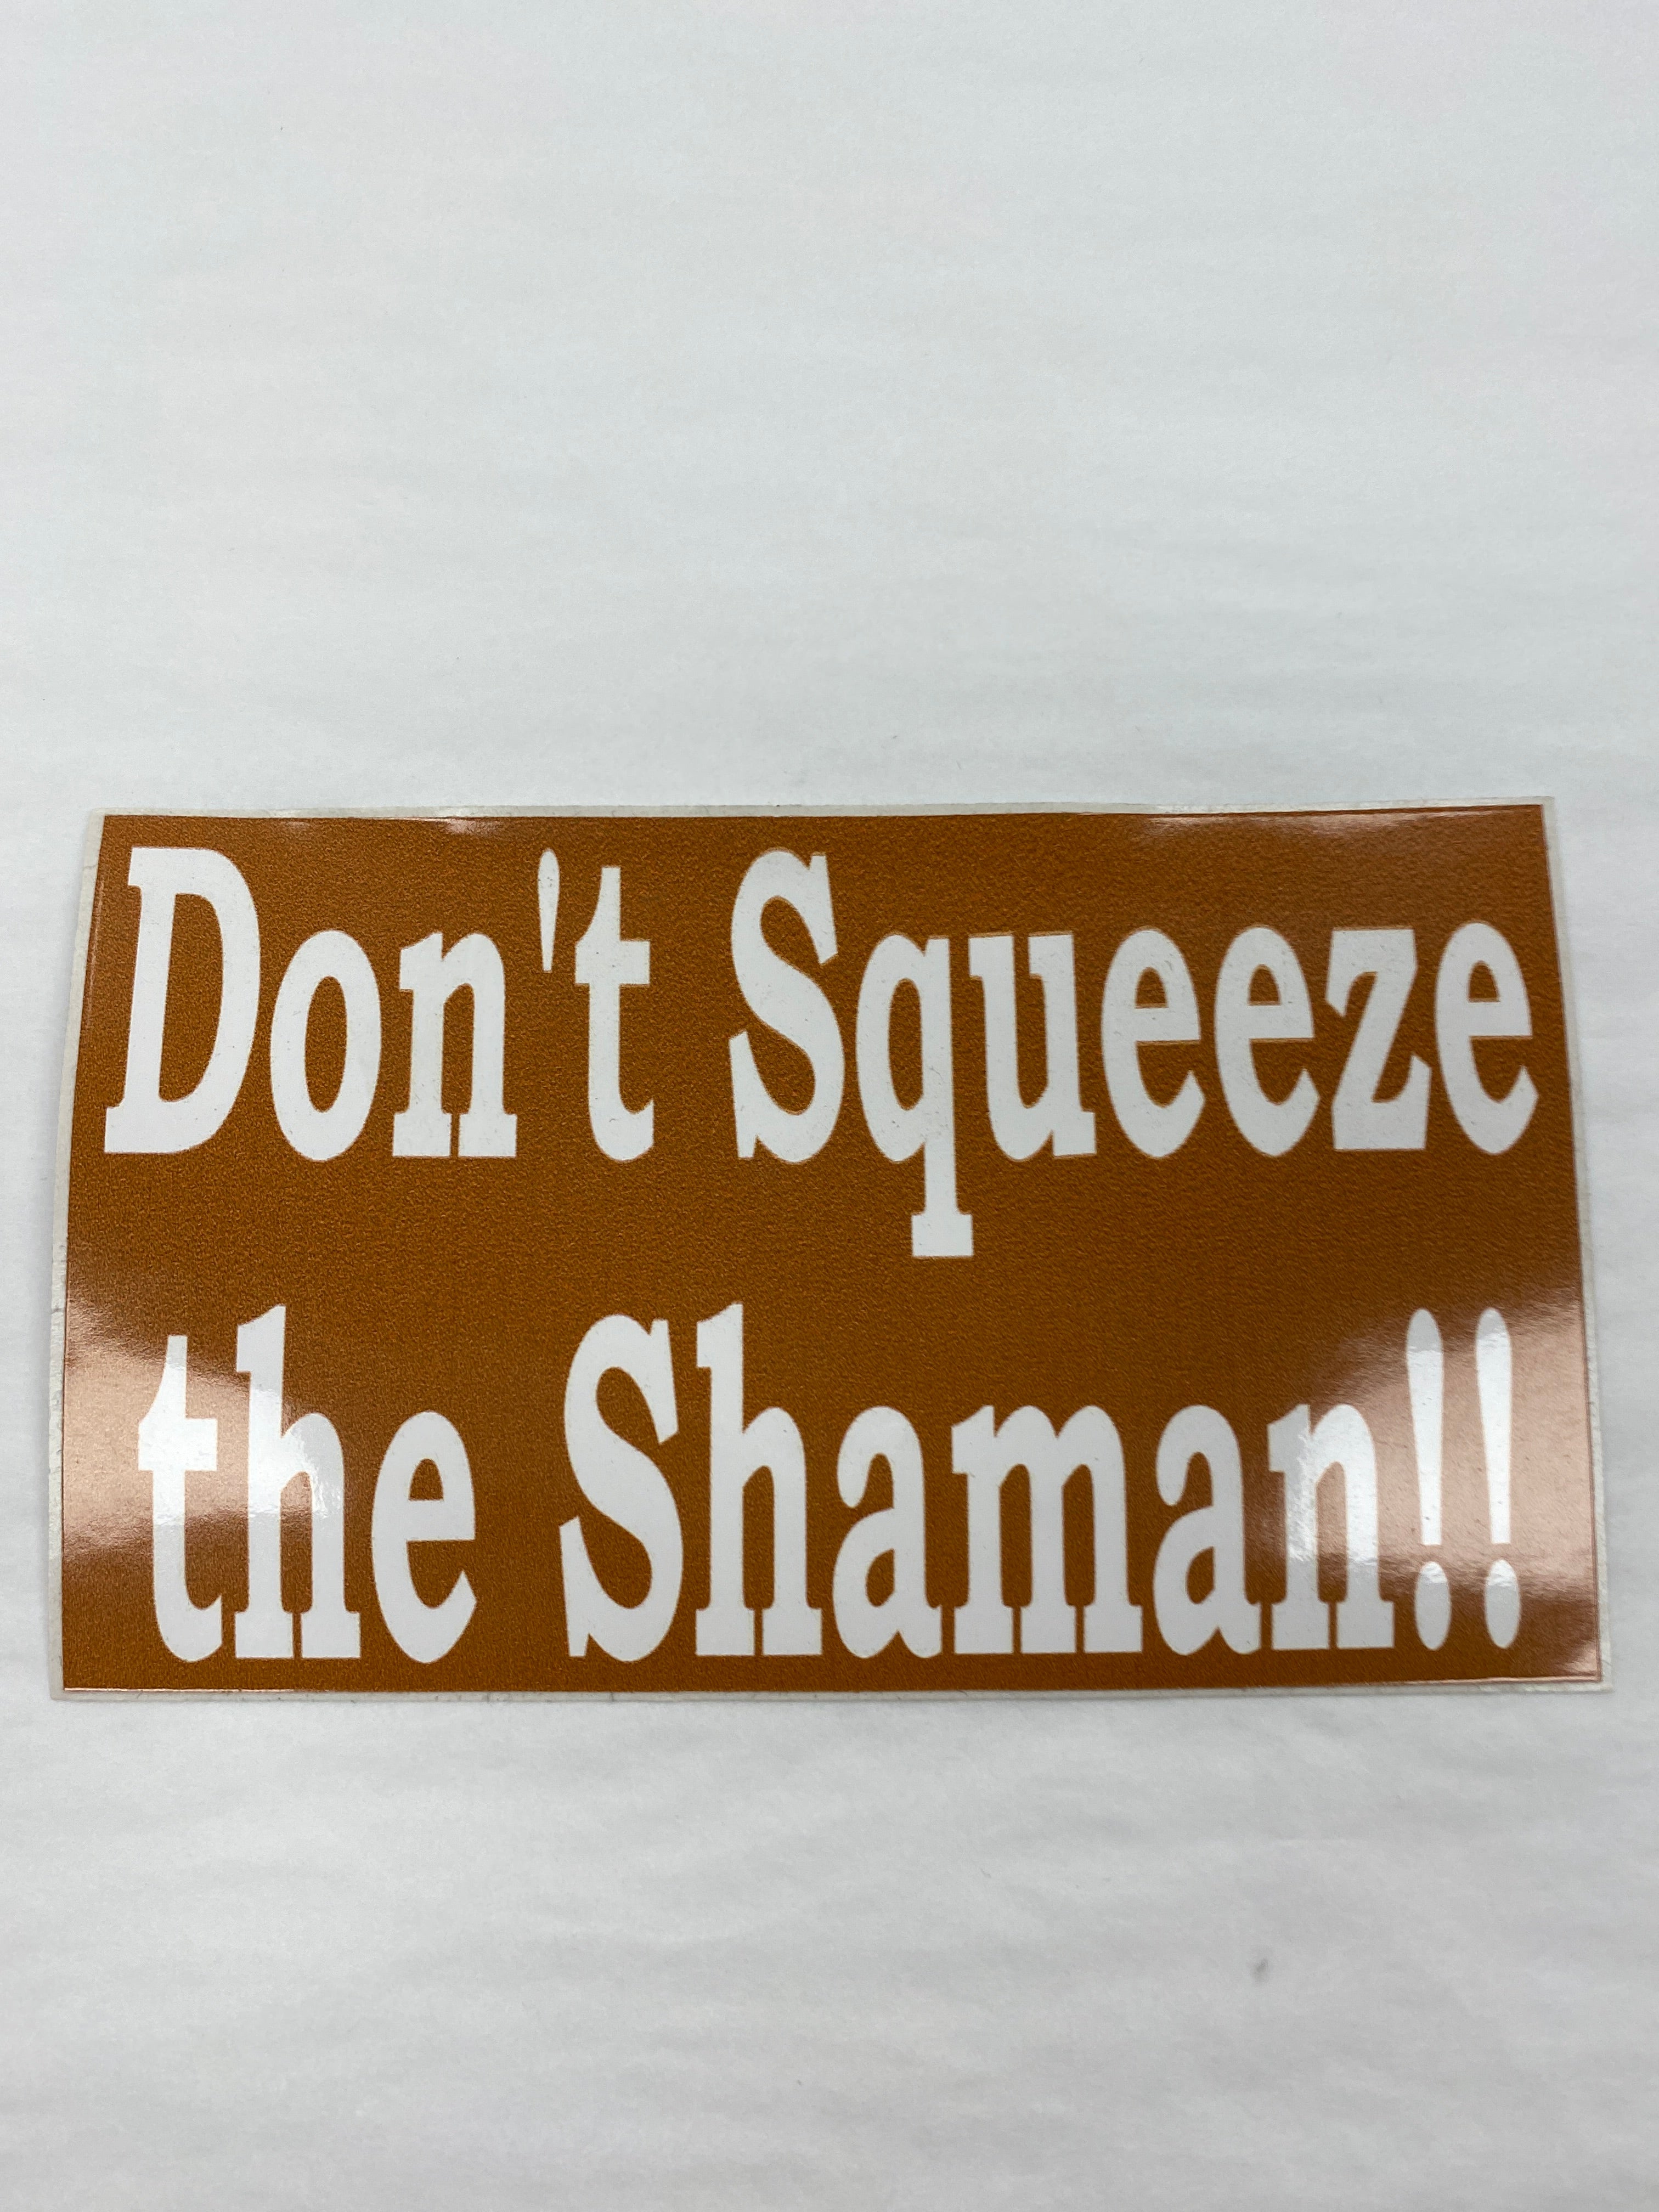 Don't Squeeze the Shaman!! Stickers